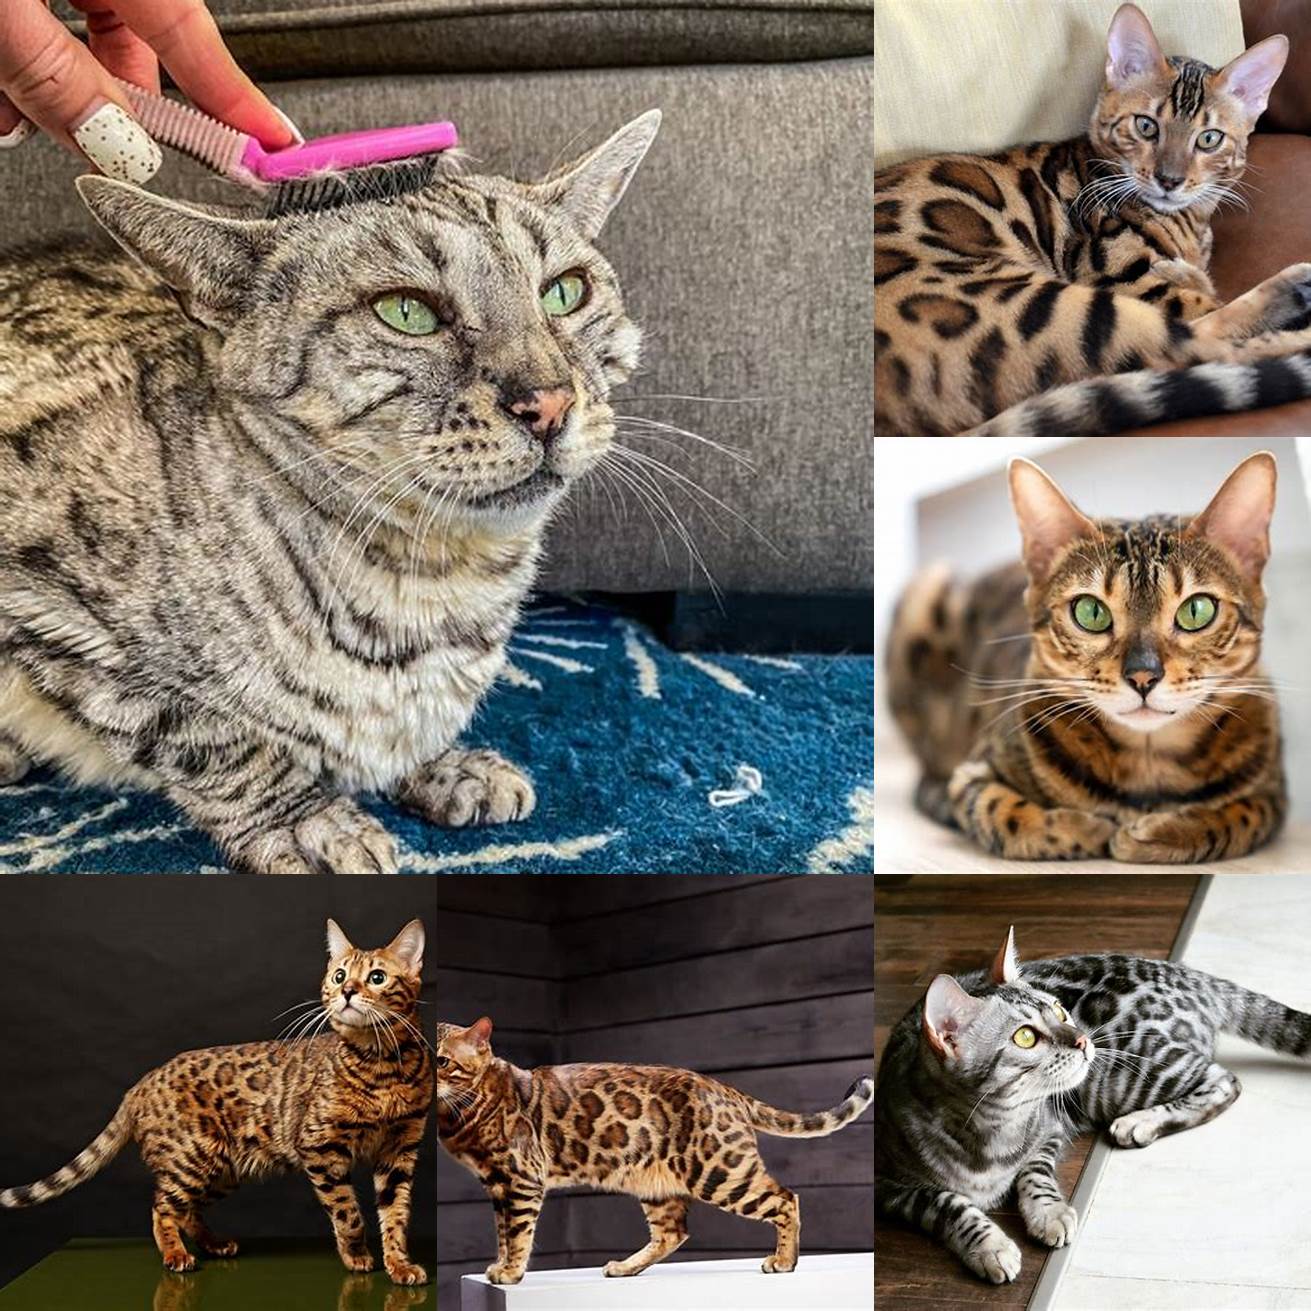 Picture of a Bengal cat grooming